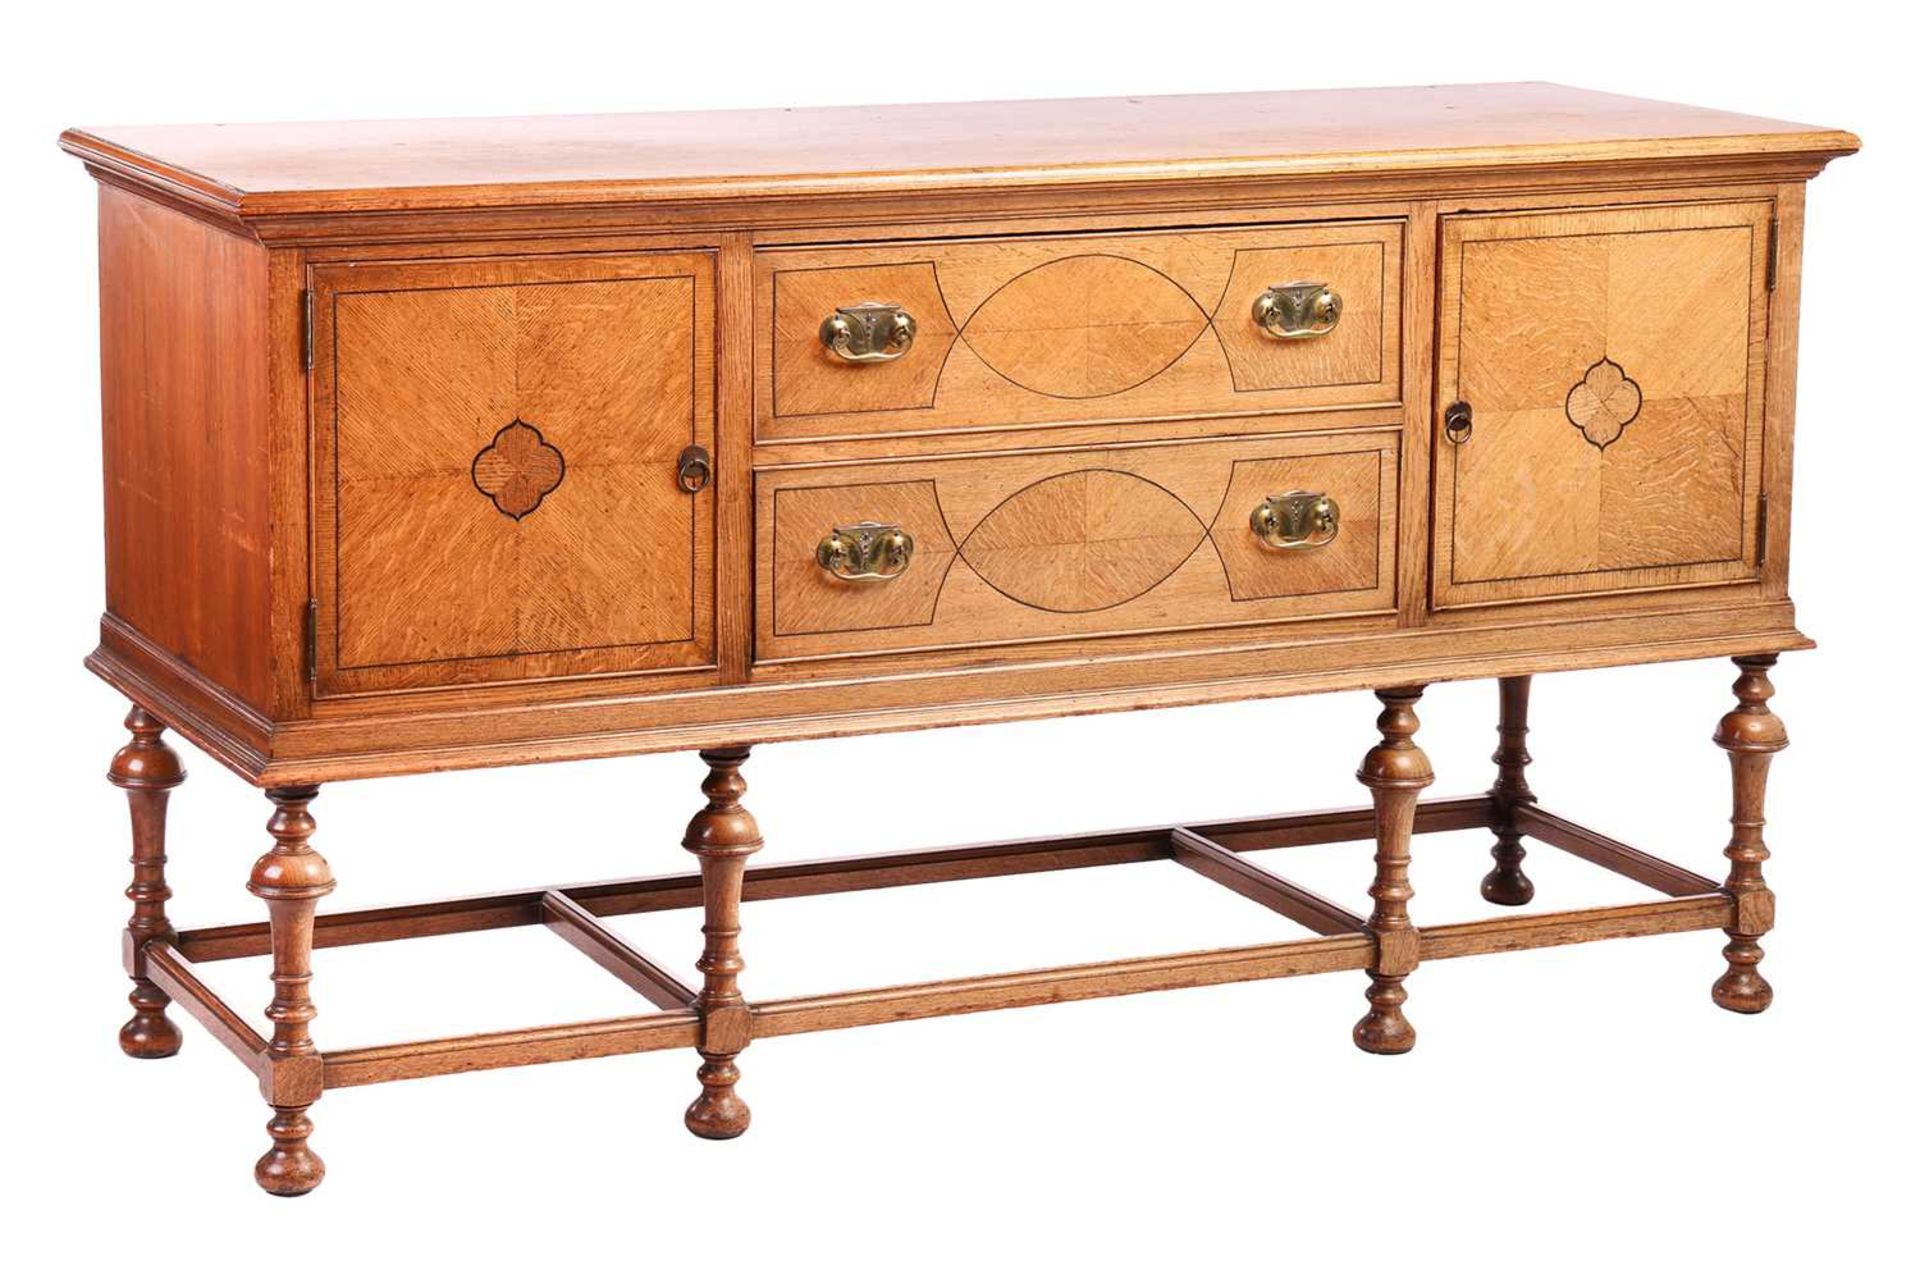 A Morgan and Co. arts and crafts oak sideboard with strung detail to the doors, raised on turned tru